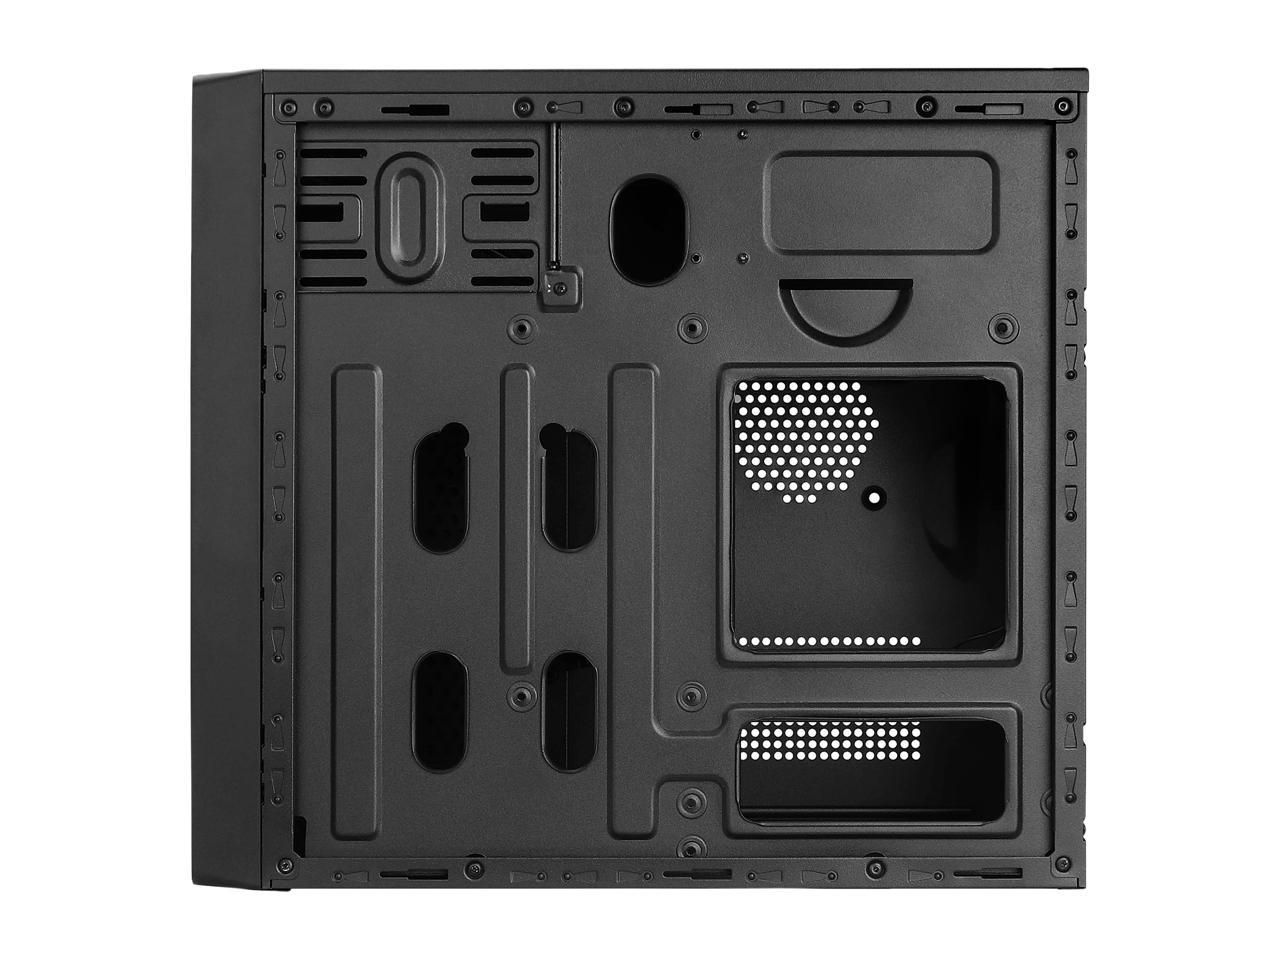 Rosewill SRM-01B Micro ATX Mini Tower Desktop PC Computer Case with Pre-Installed 80mm Case Fan, USB 3.0